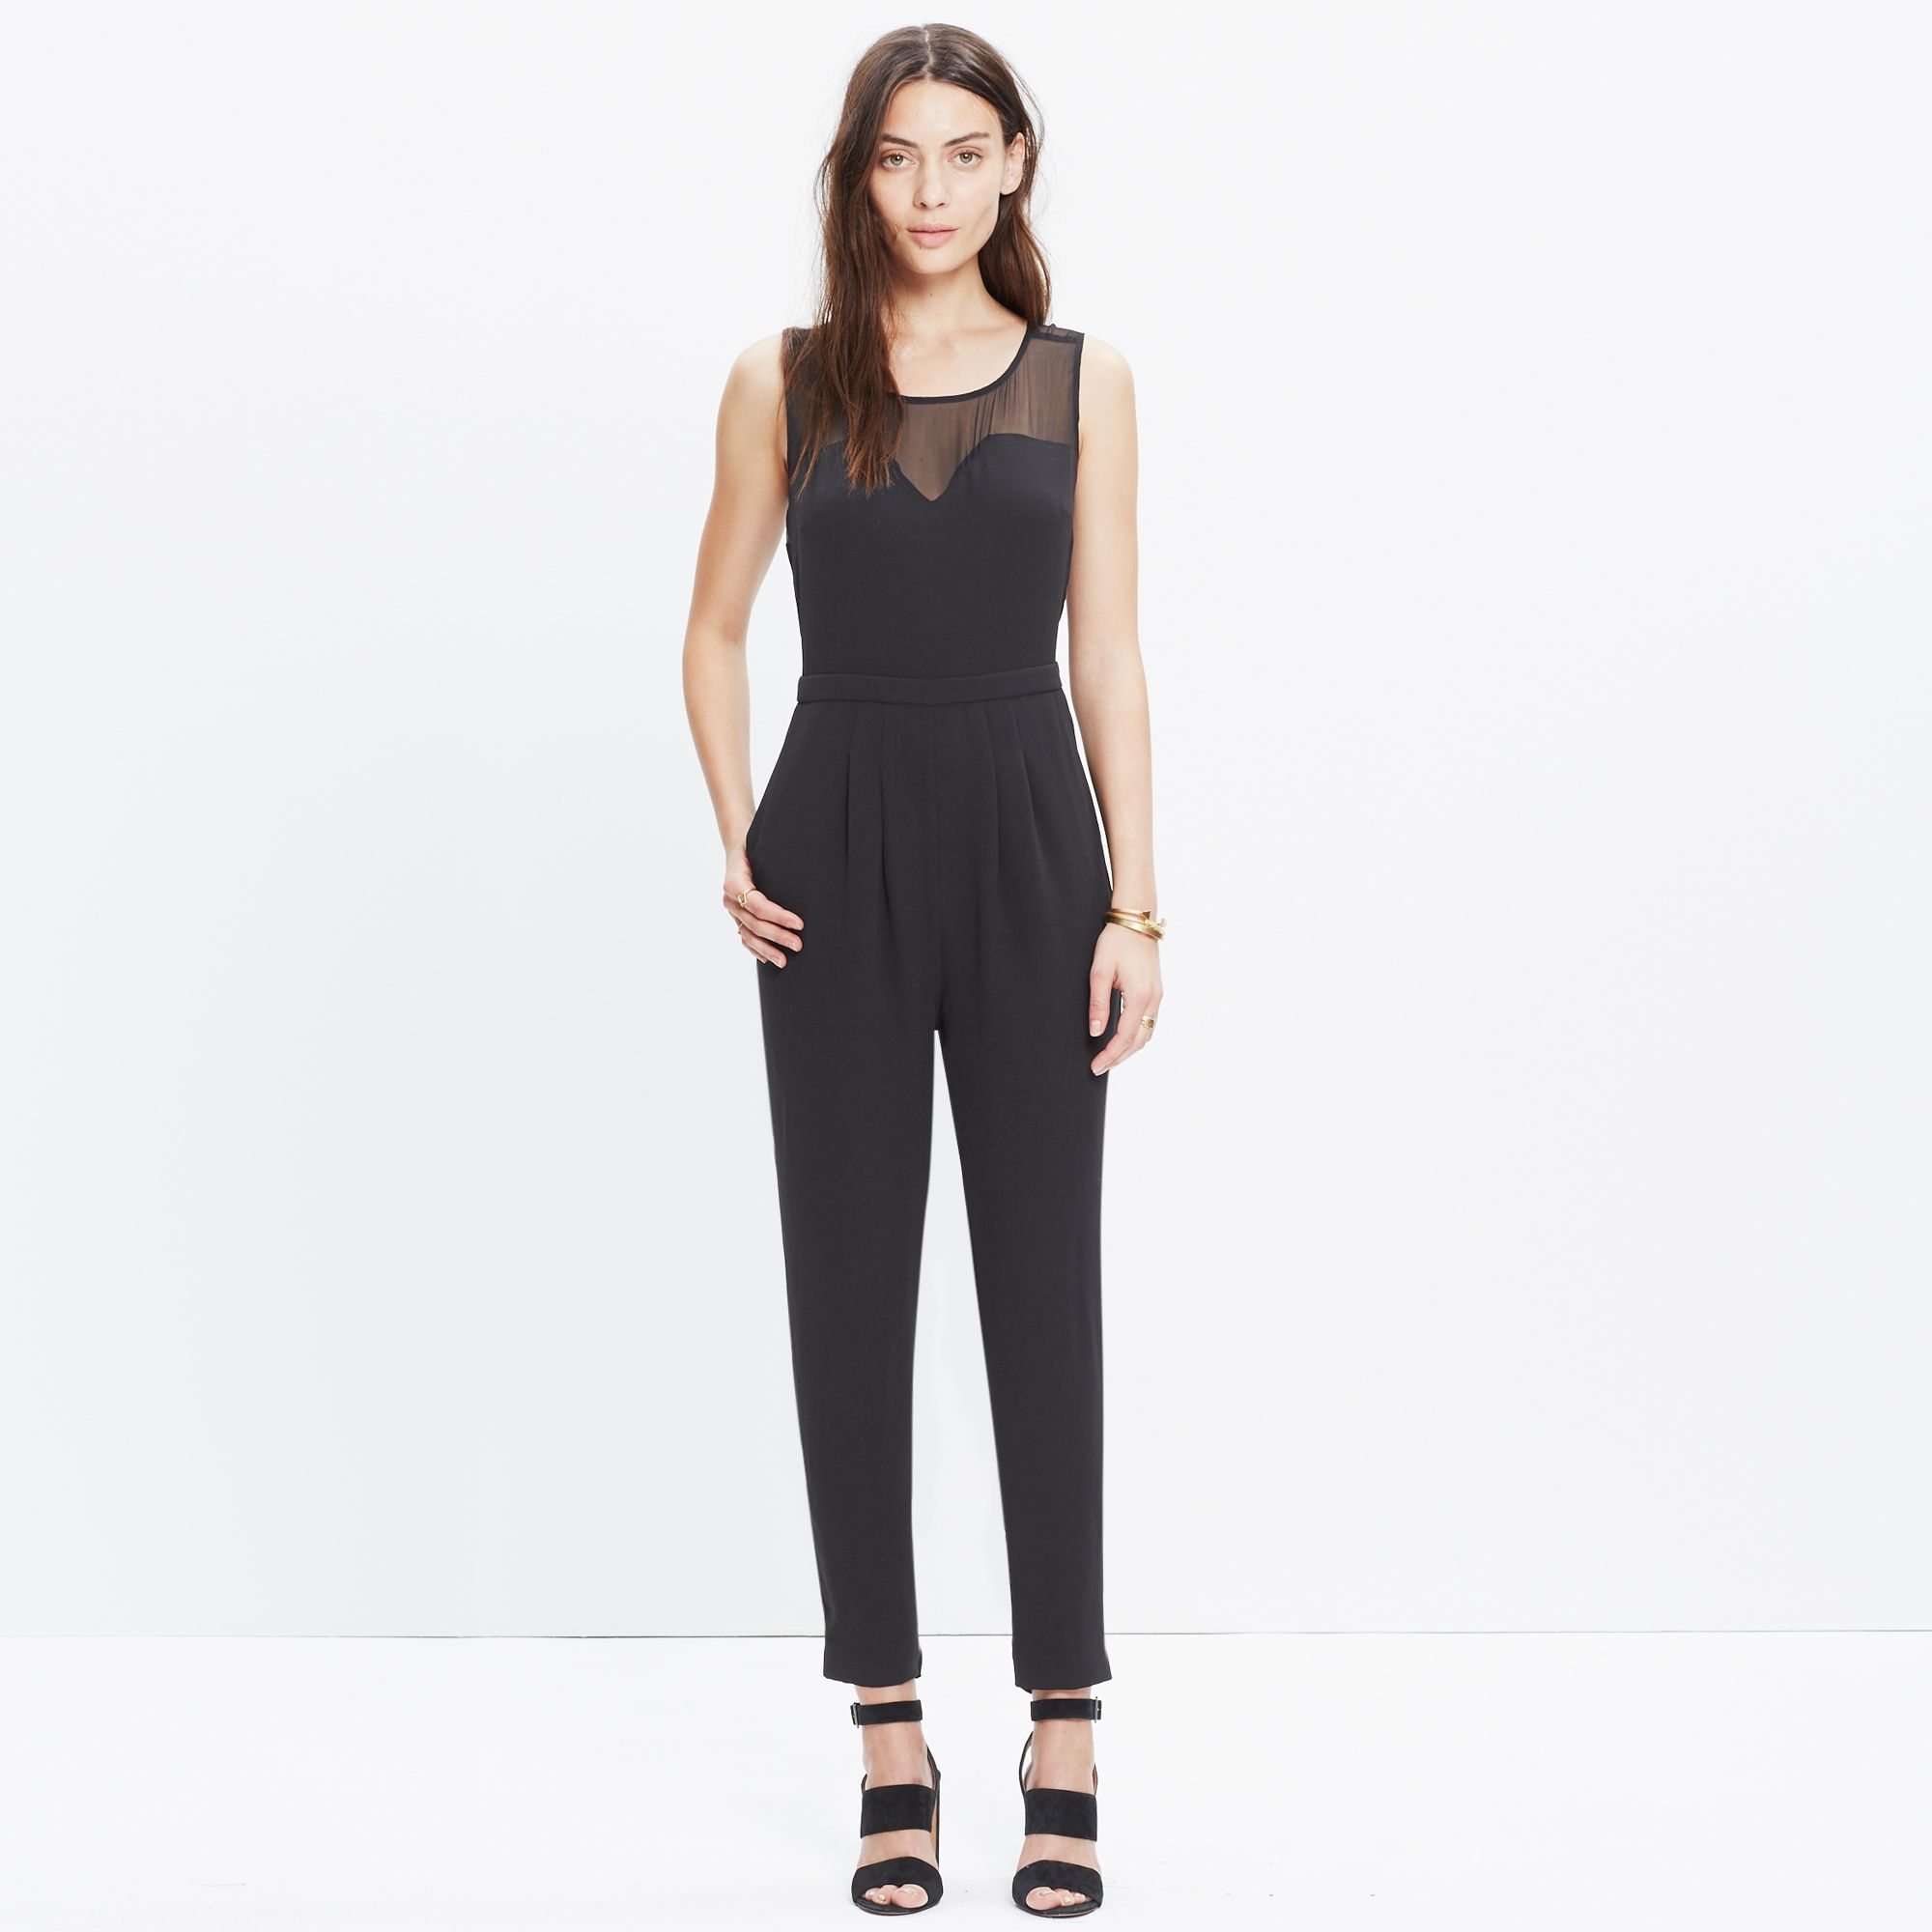 Lyst - Madewell Norwood Jumpsuit in Black